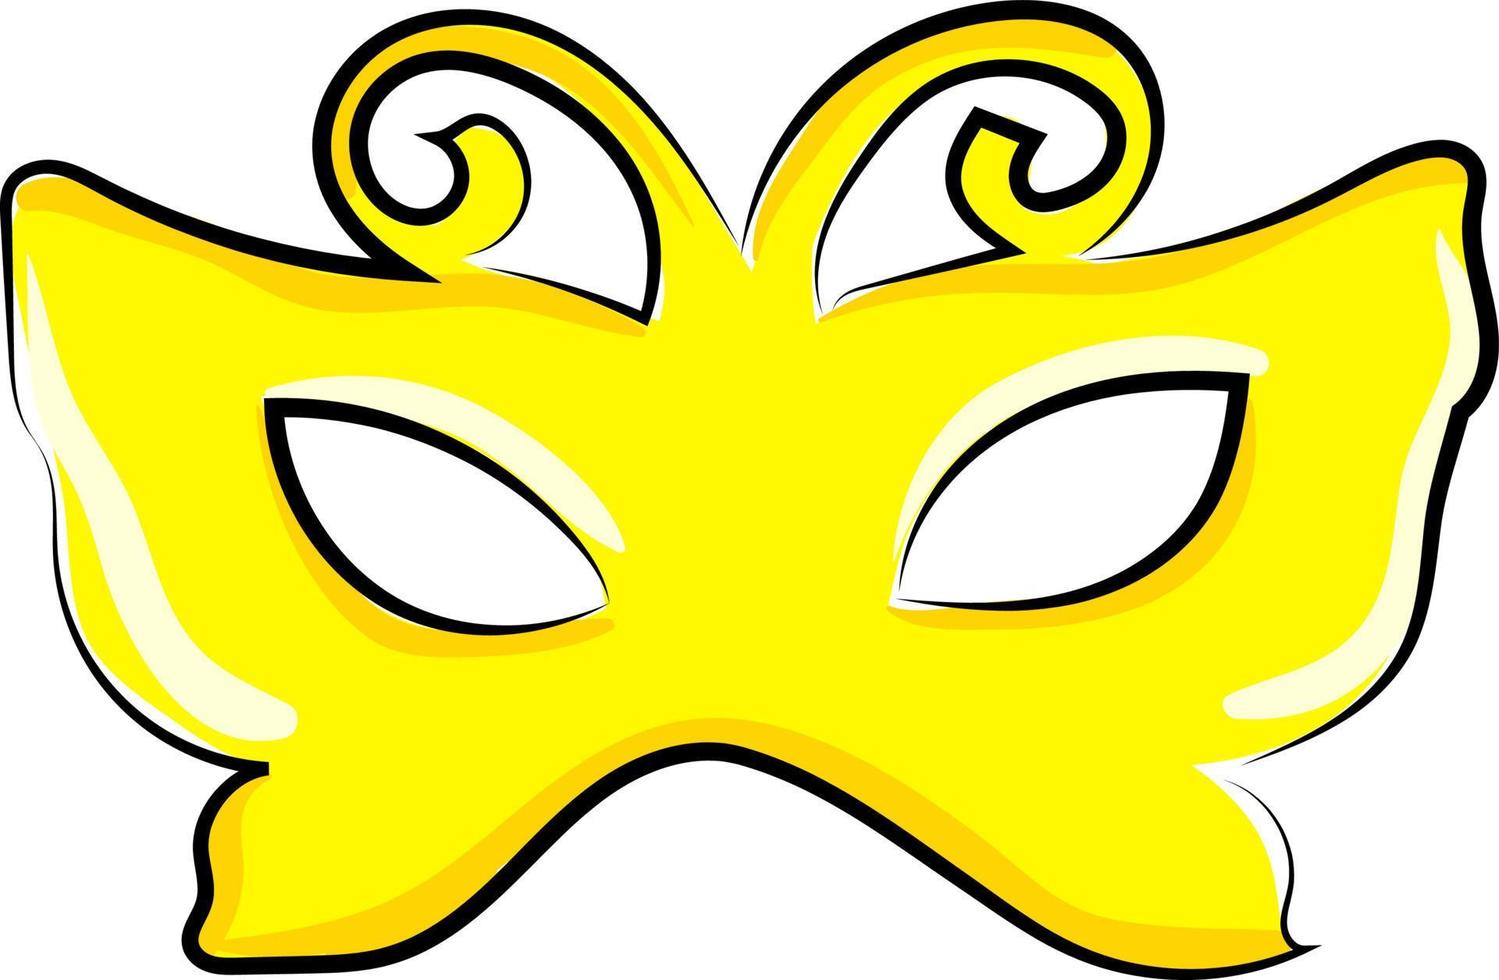 Yellow butterfly mask, illustration, vector on white background.